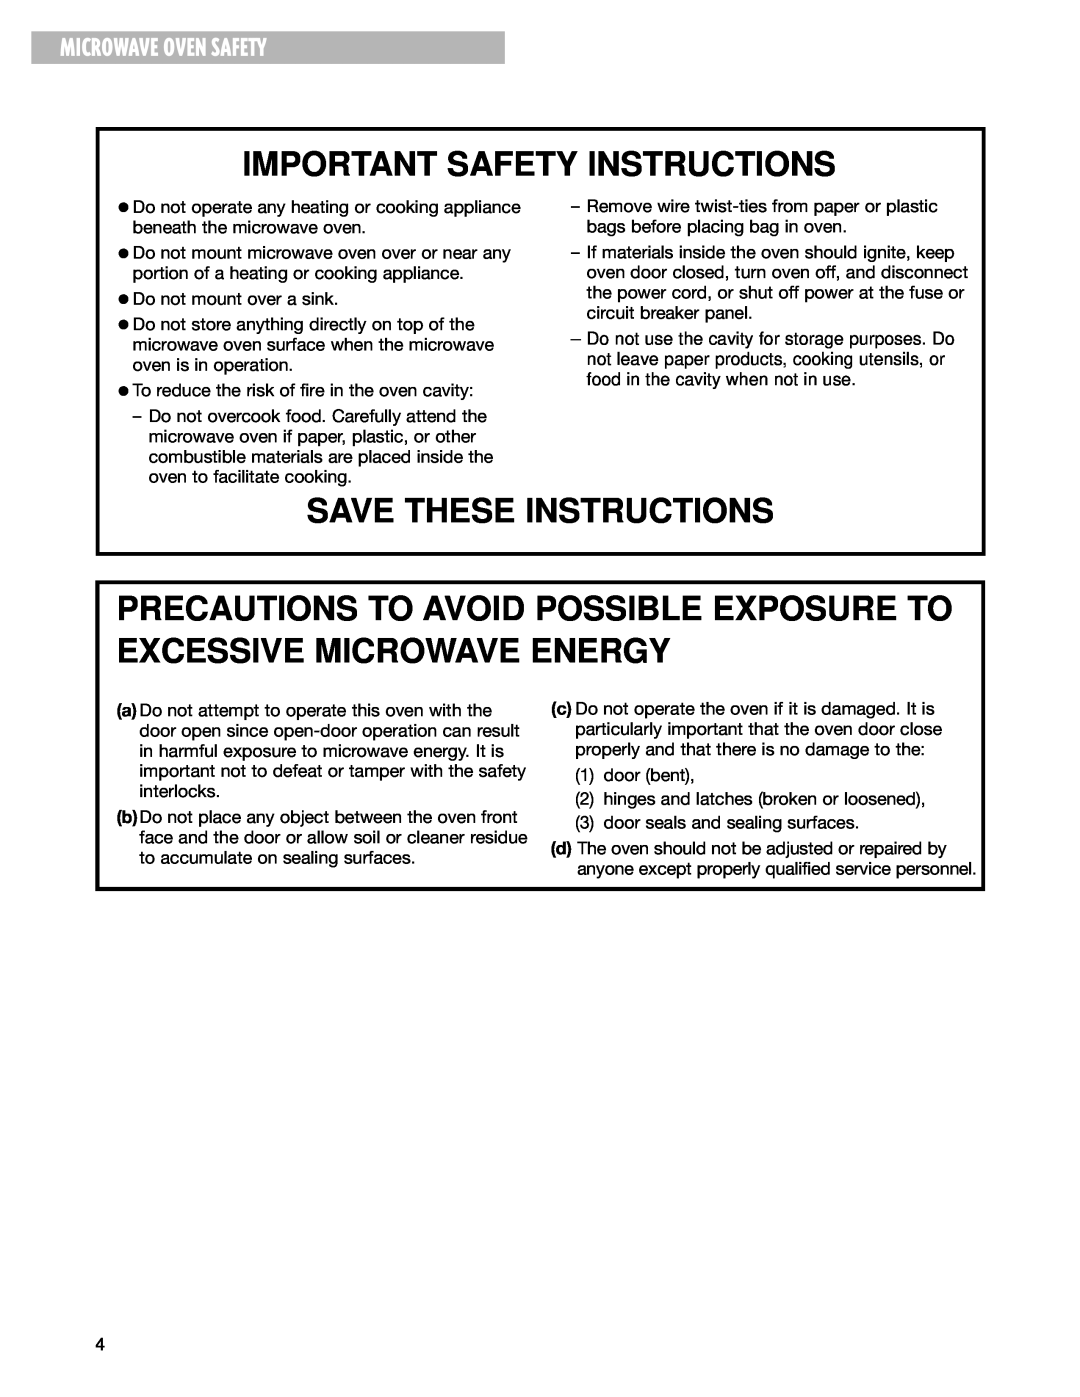 Whirlpool MT4140SK, MT4210SK Microwave Oven Safety, Important Safety Instructions, Save These Instructions 